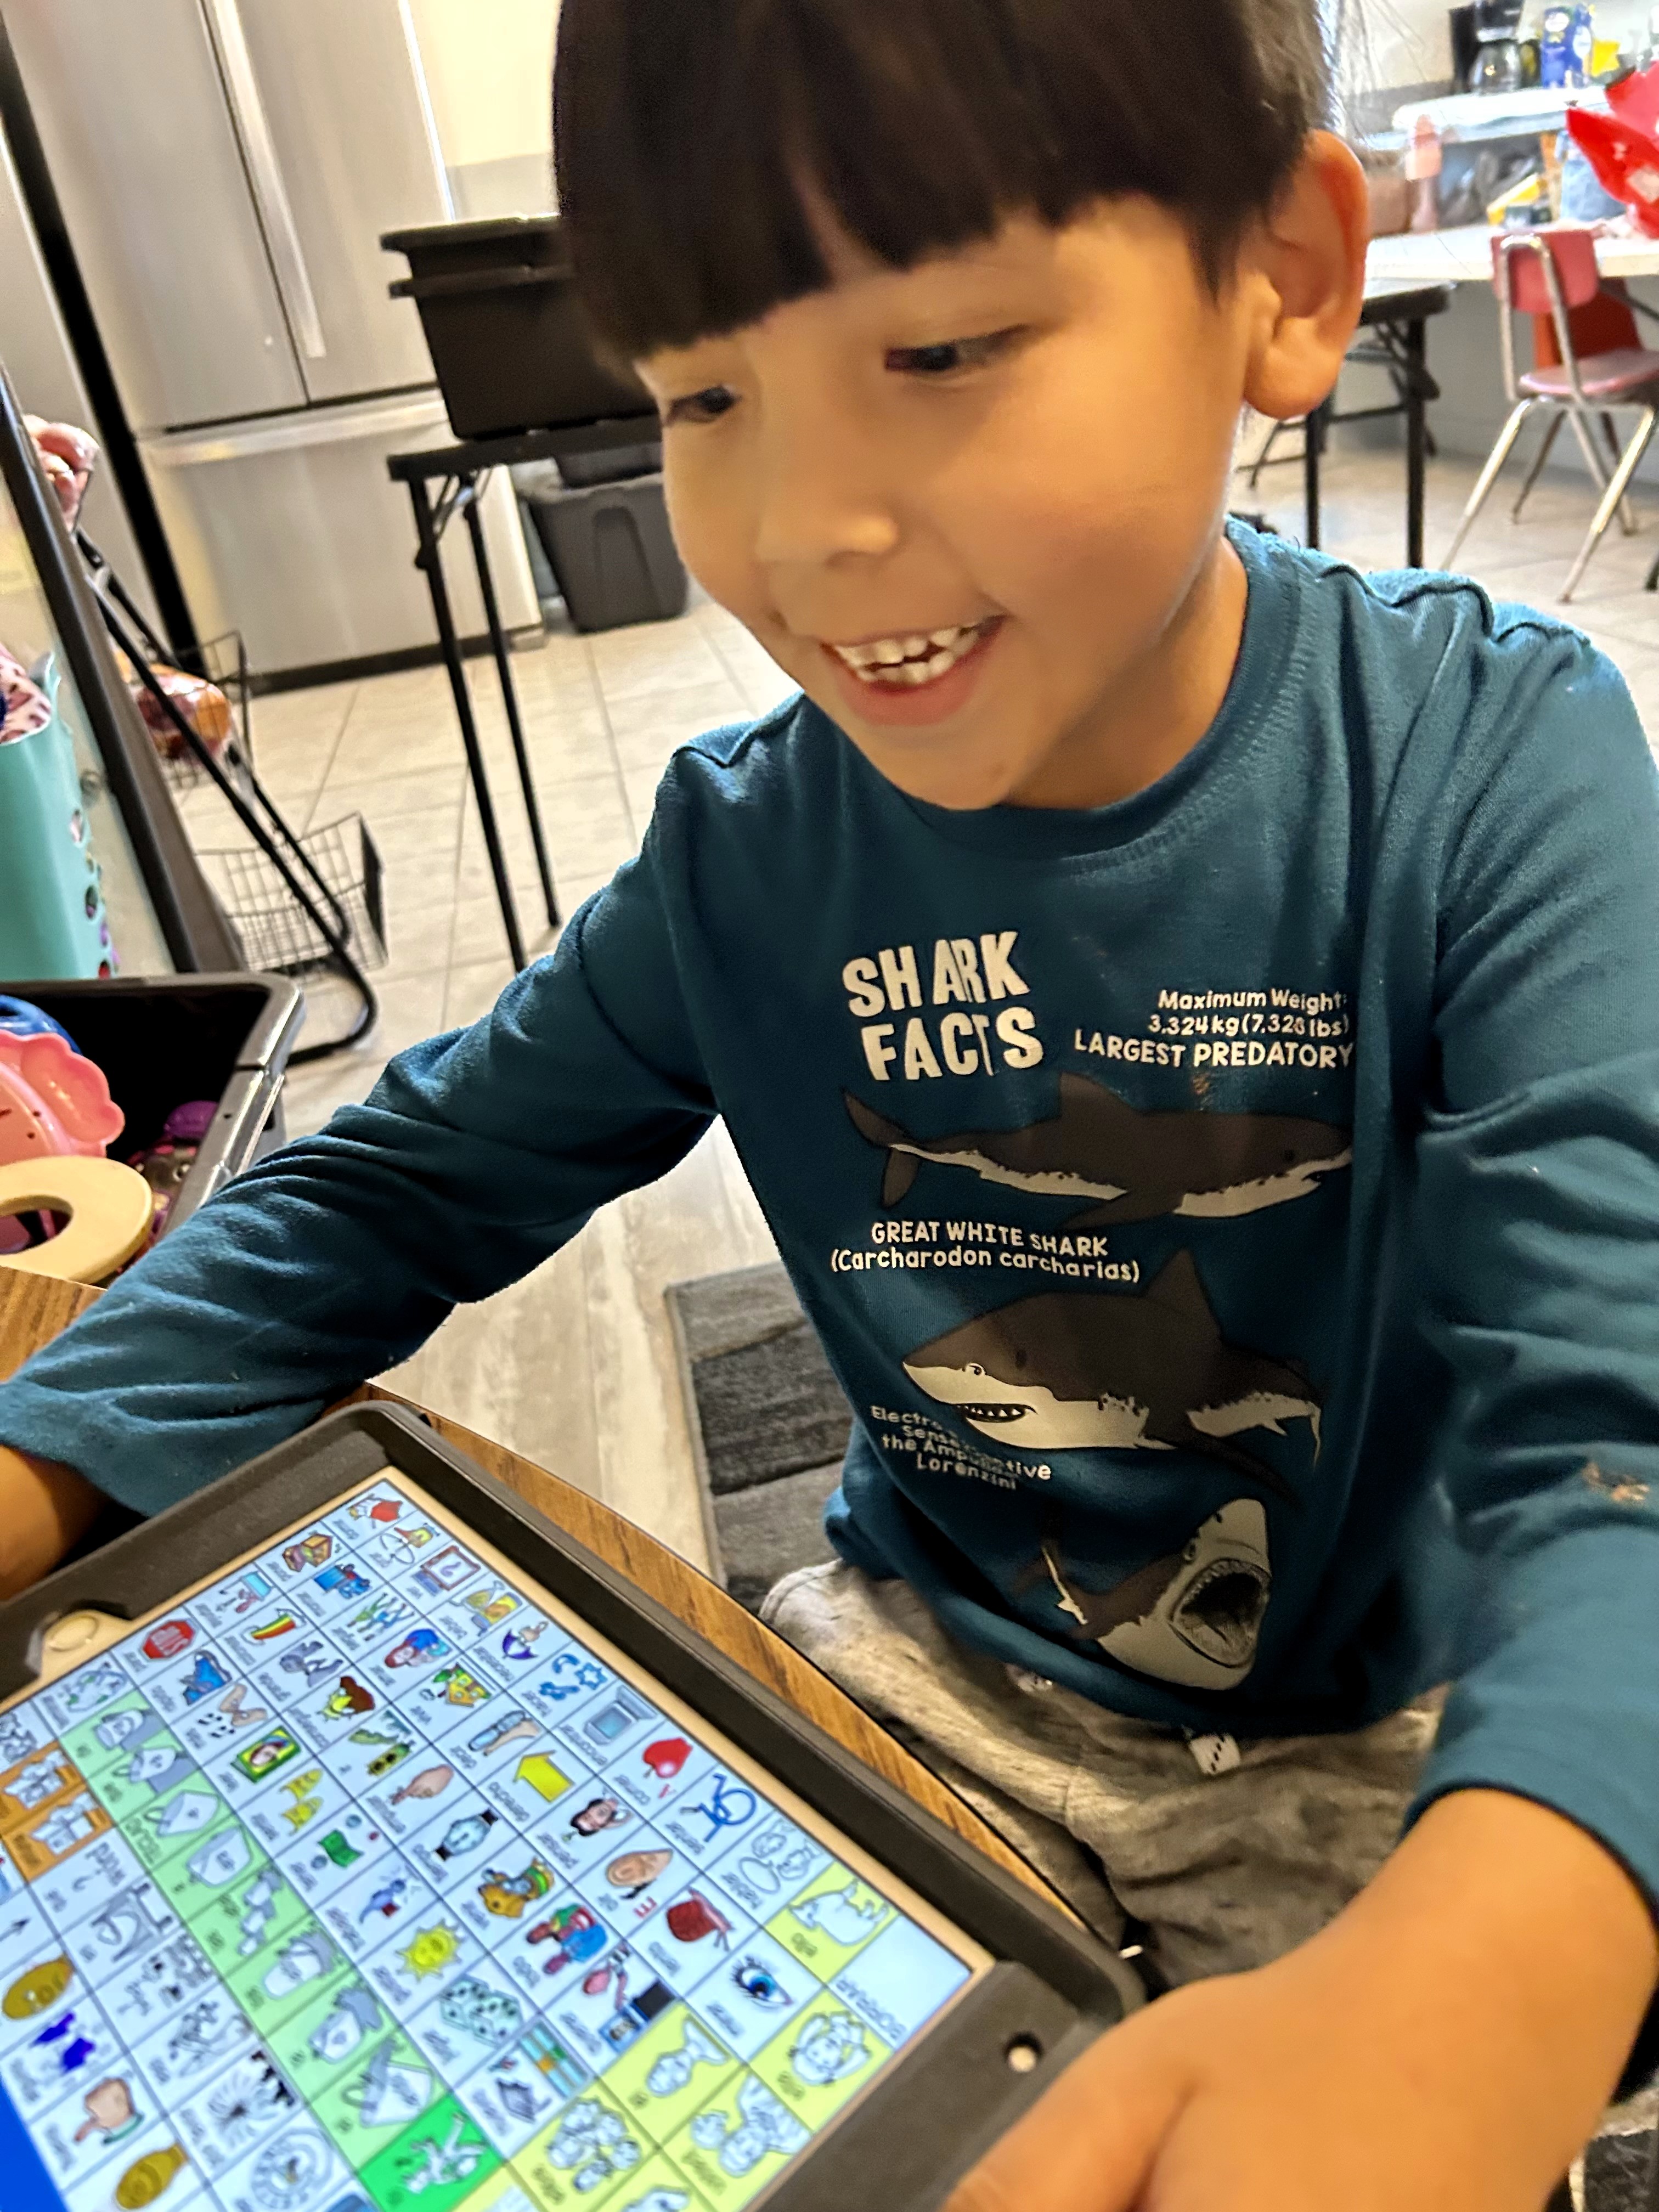 Young boy smiling using an ipad for communication